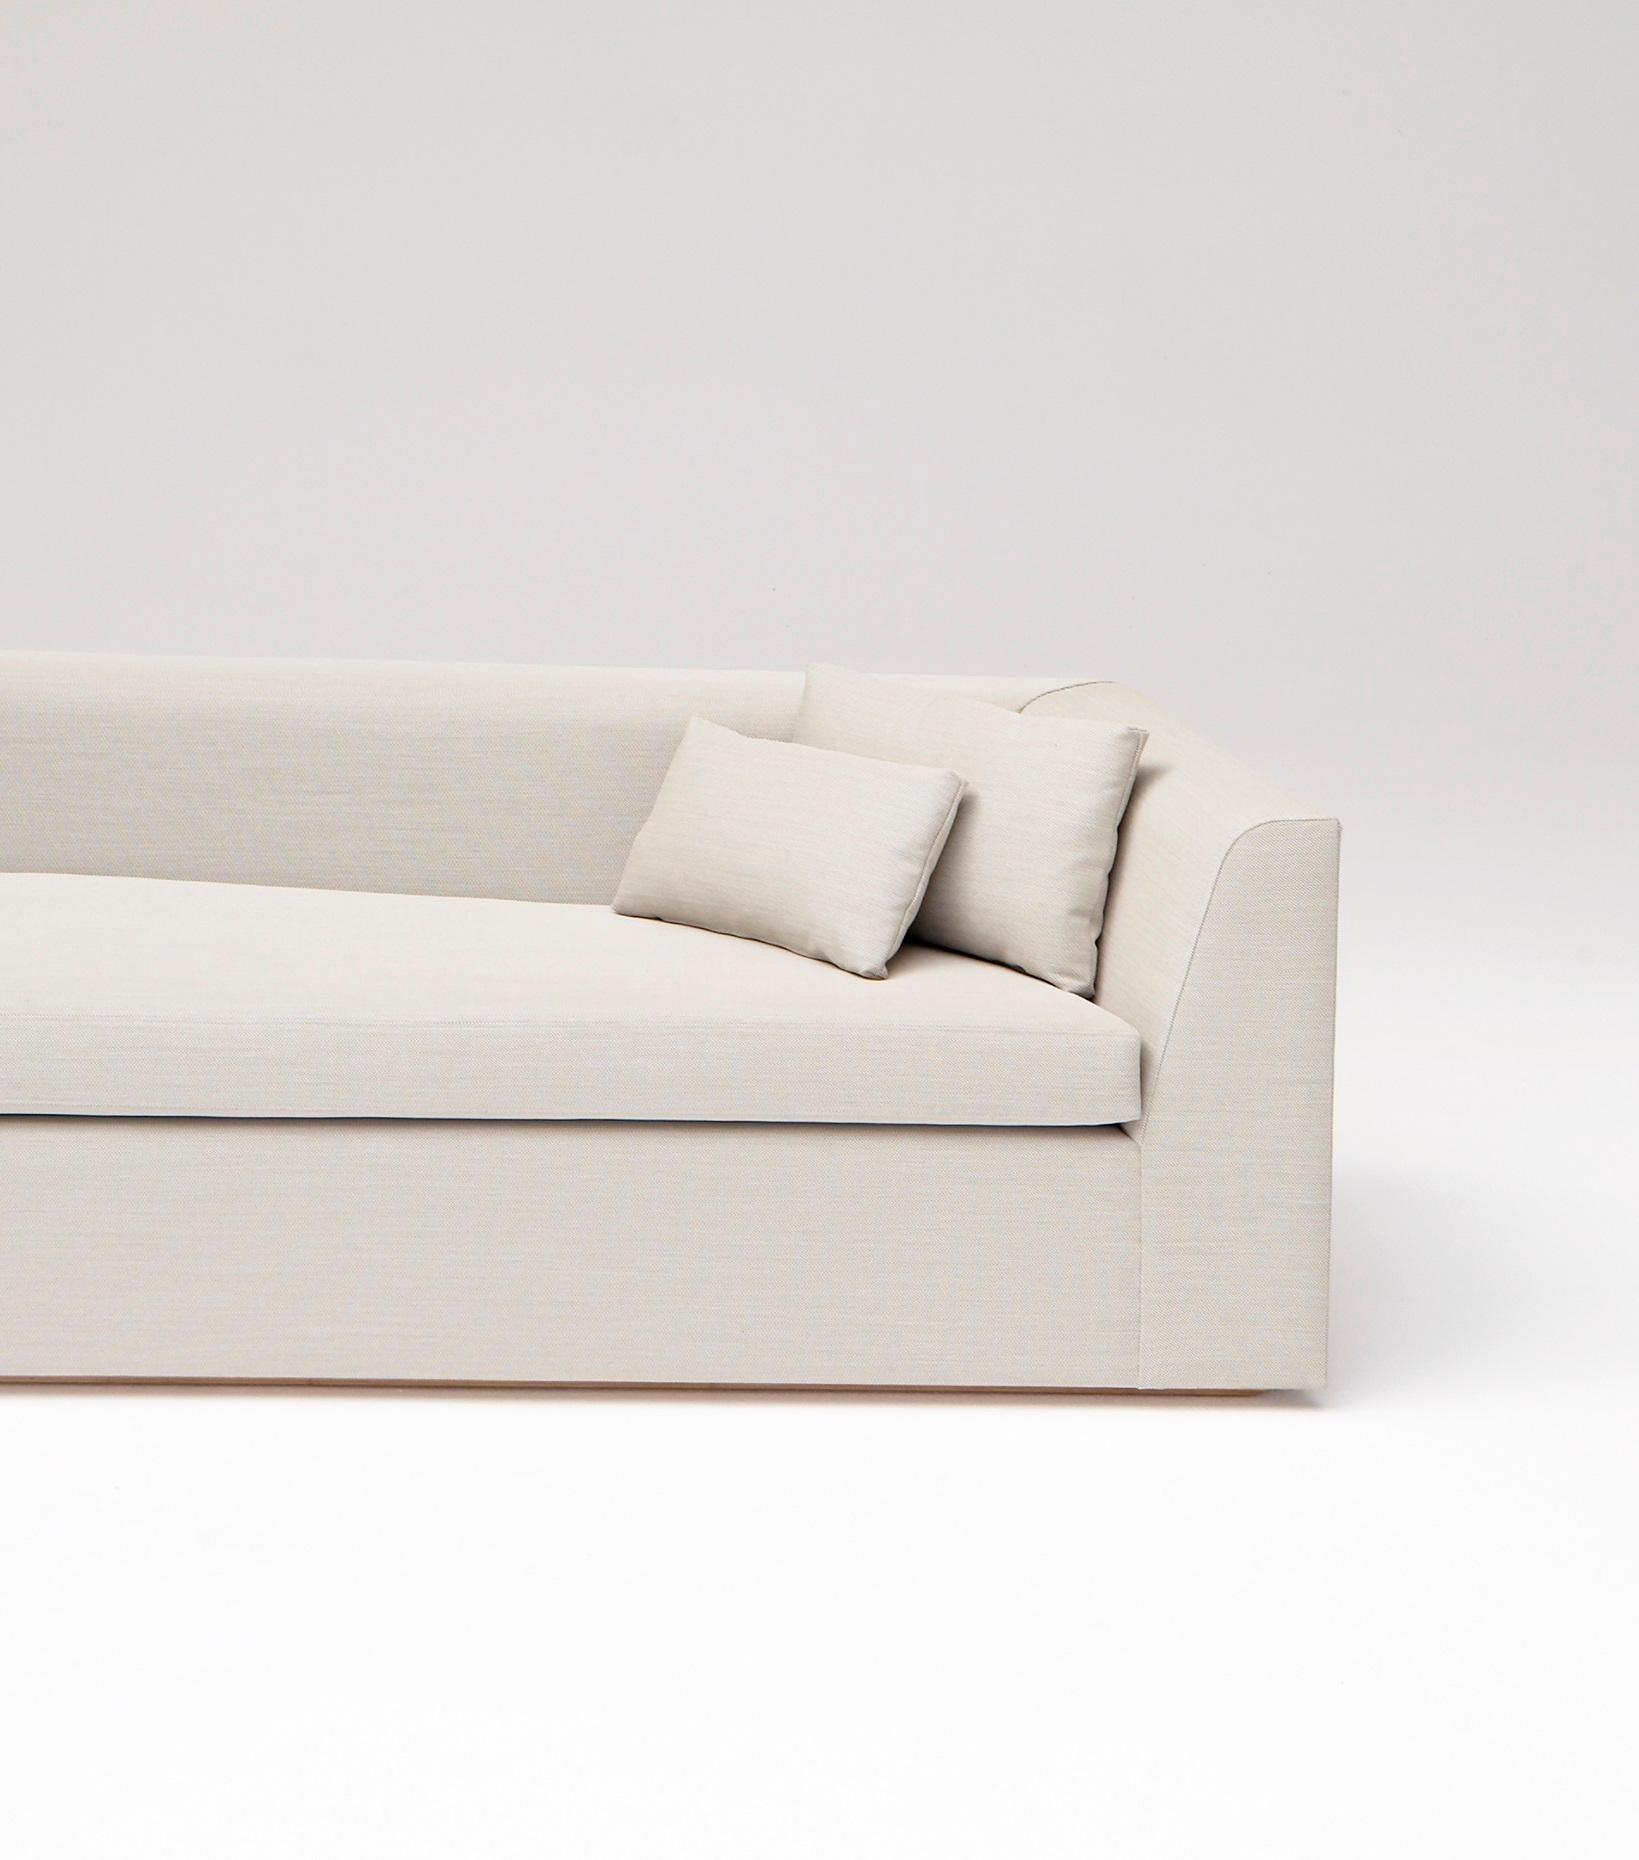 American Pangaea Sofa by Phase Design For Sale